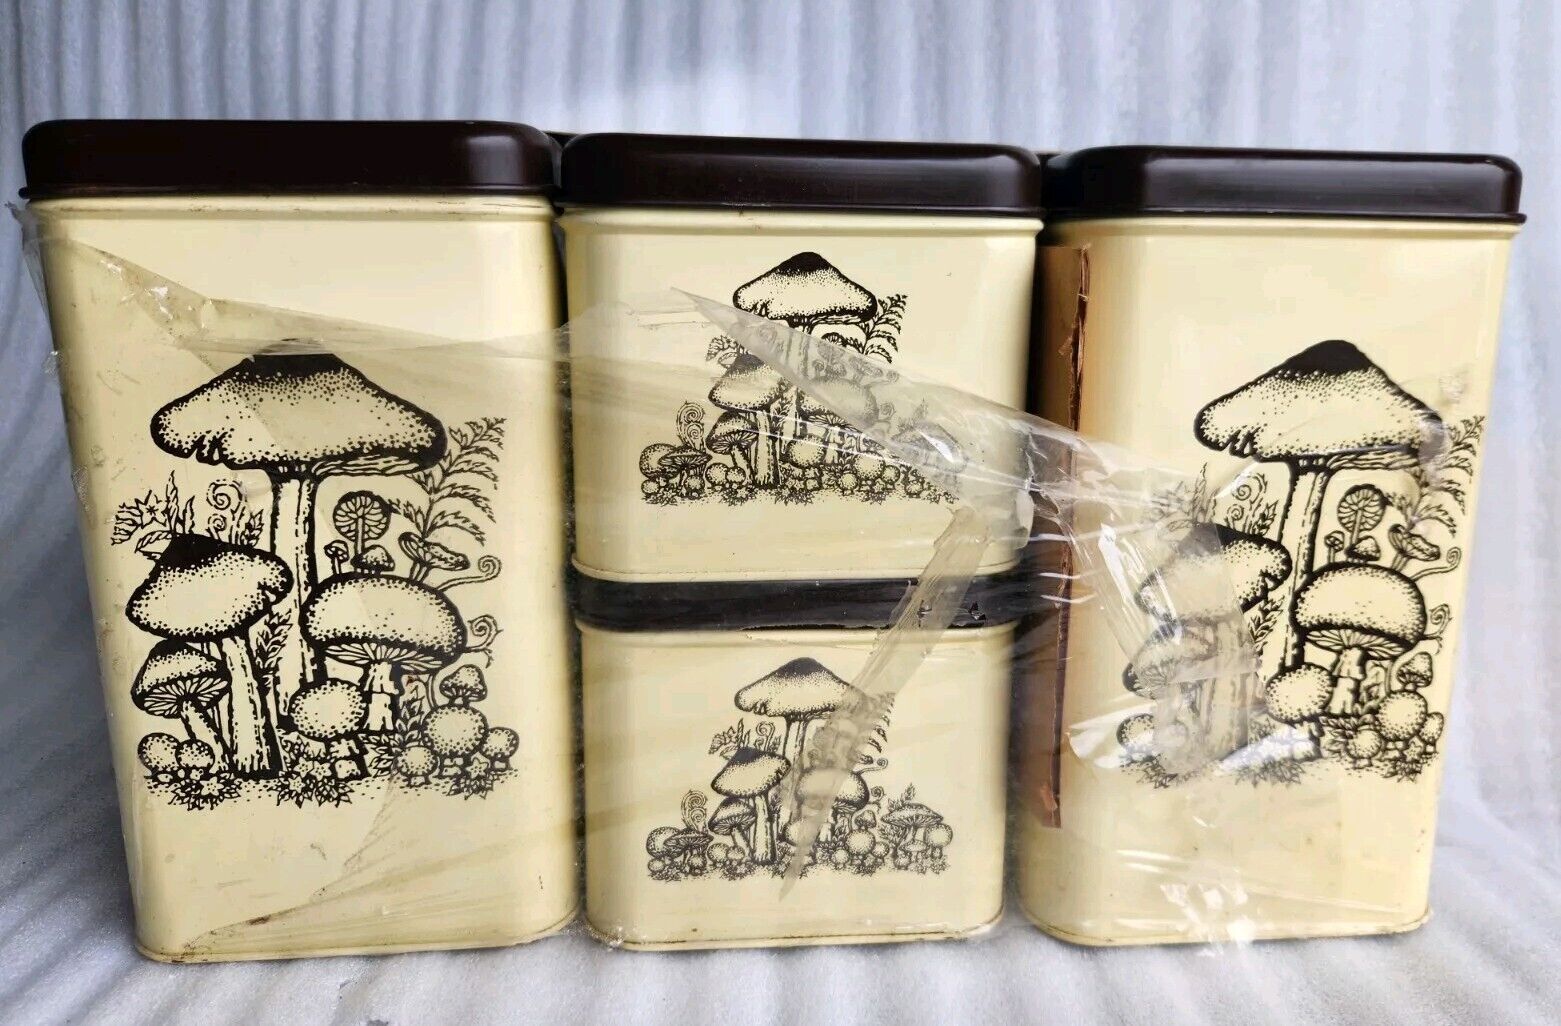 VTG NOS 70s Cheinco Kitchen Mushroom Tin Metal Container Canister Black Lids New